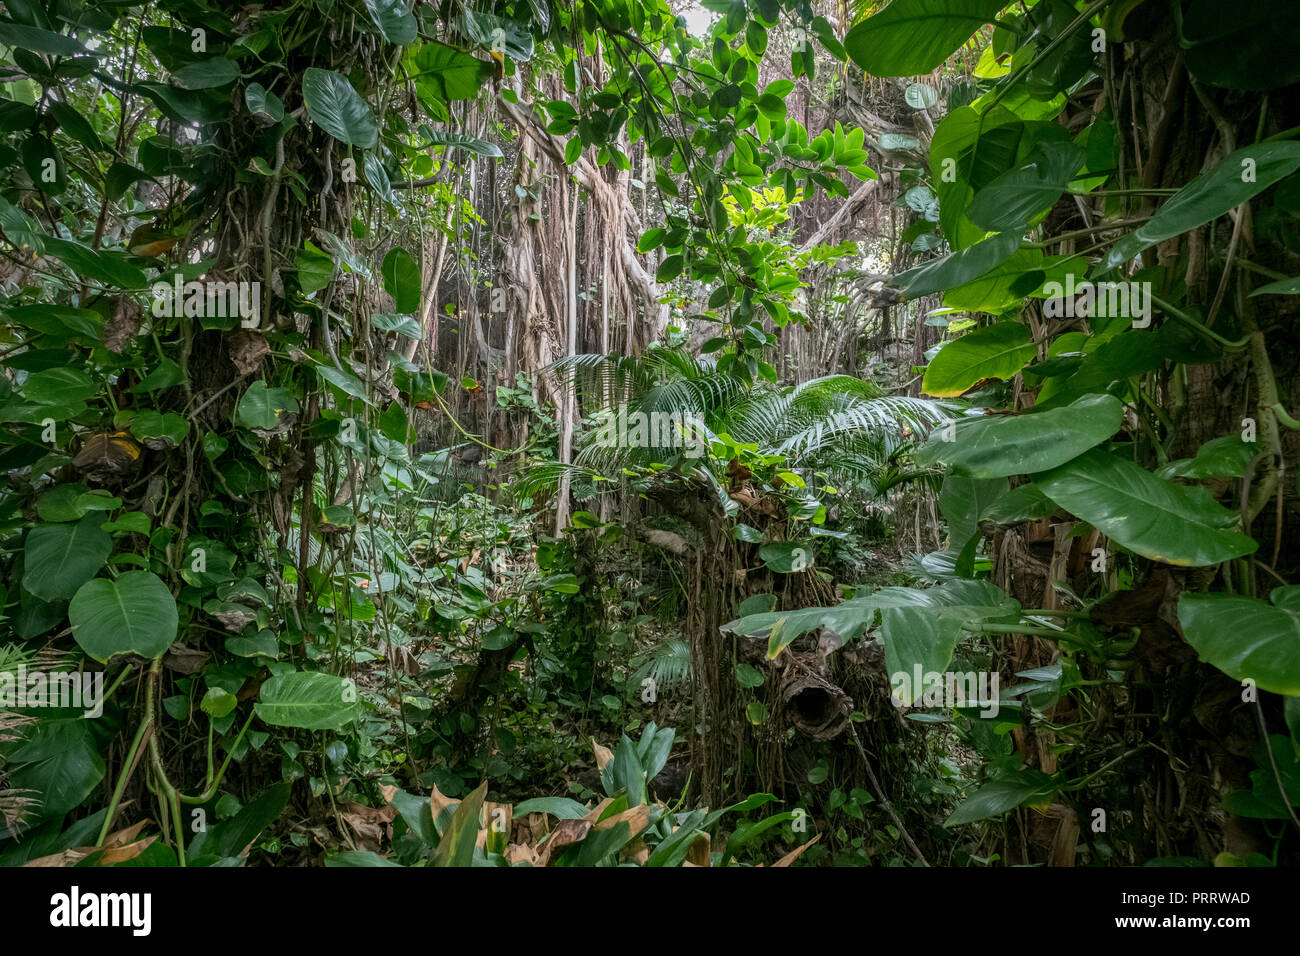 jungle or rainforest, inside tropical forest environment , Stock Photo